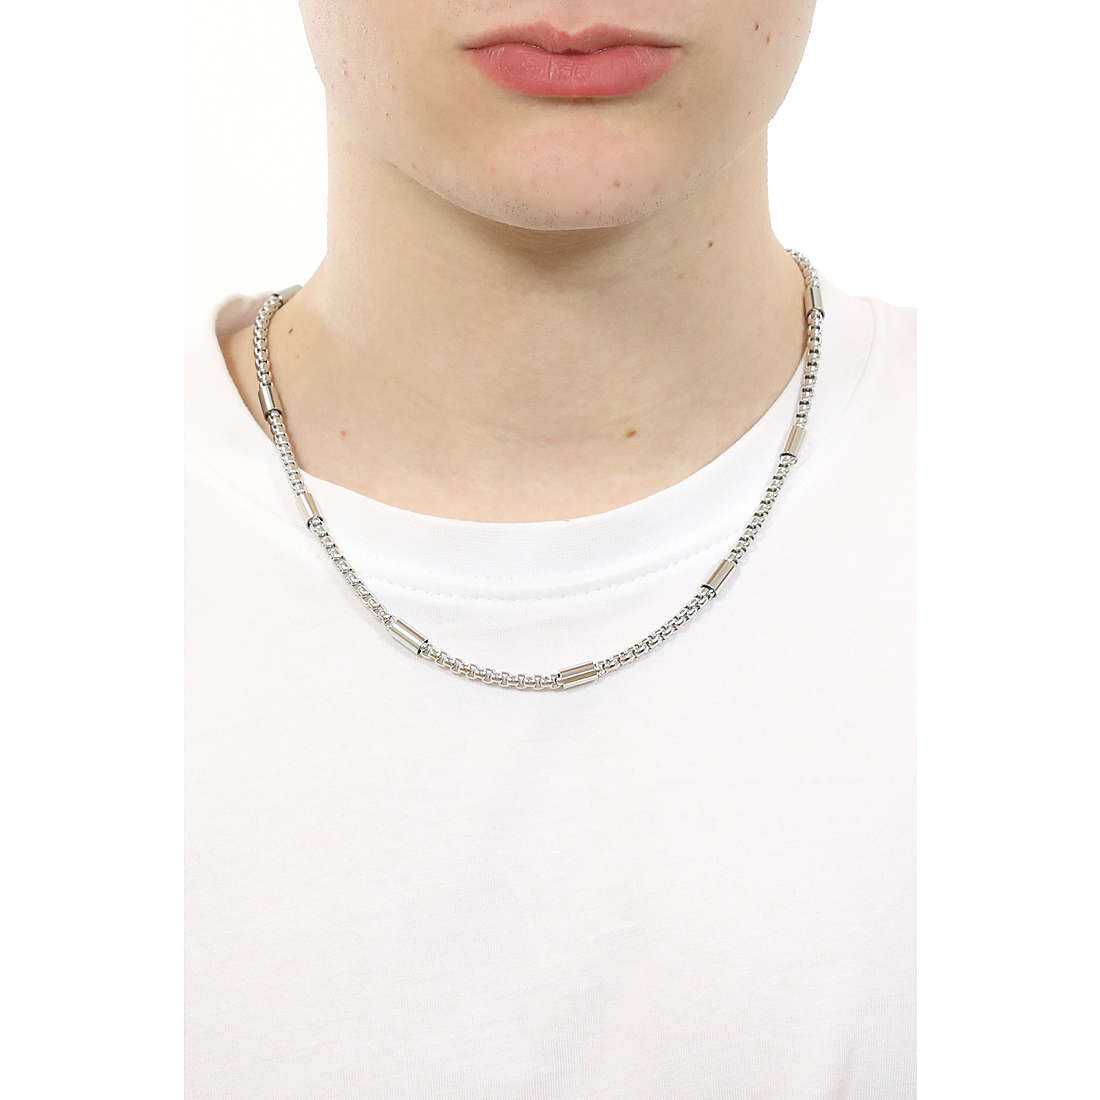 Sector necklaces Basic man SZS69 wearing